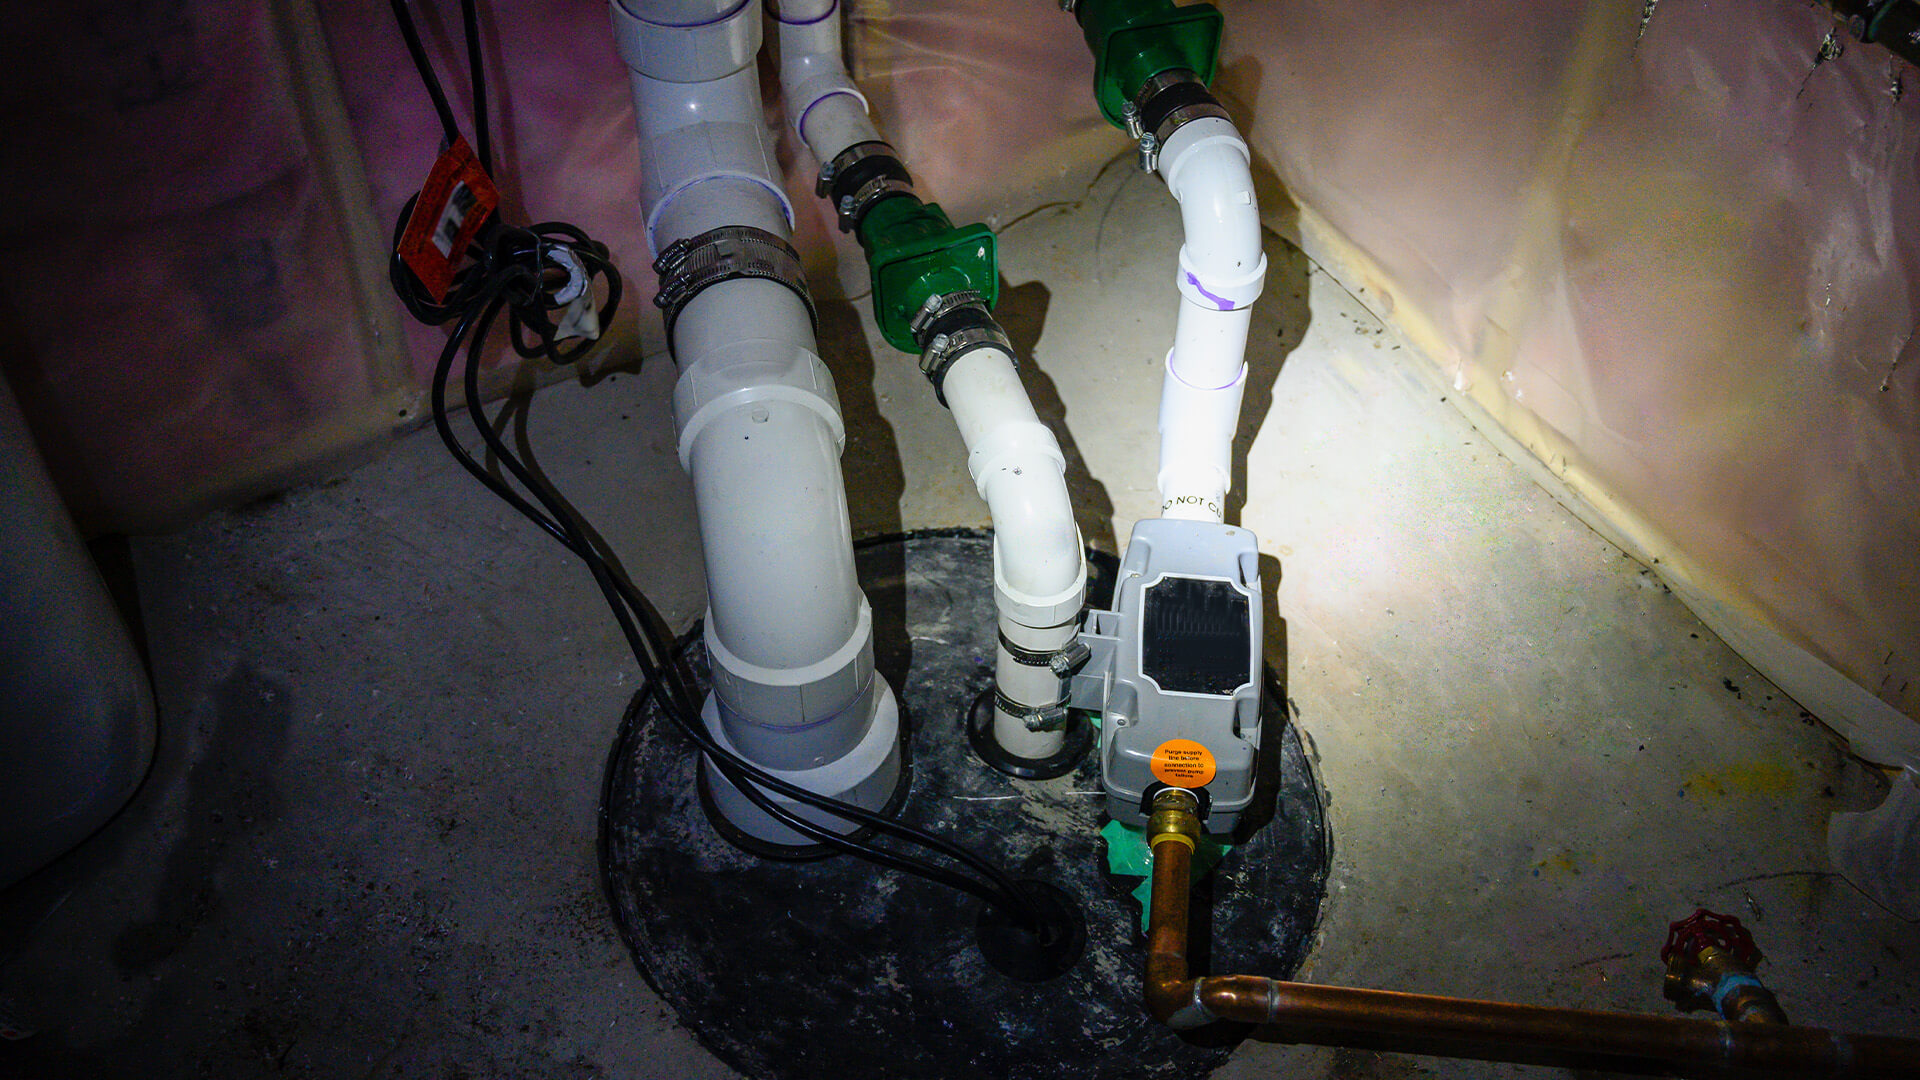 How to Know It's Time to Replace Your Sump Pump - BUILD Magazine